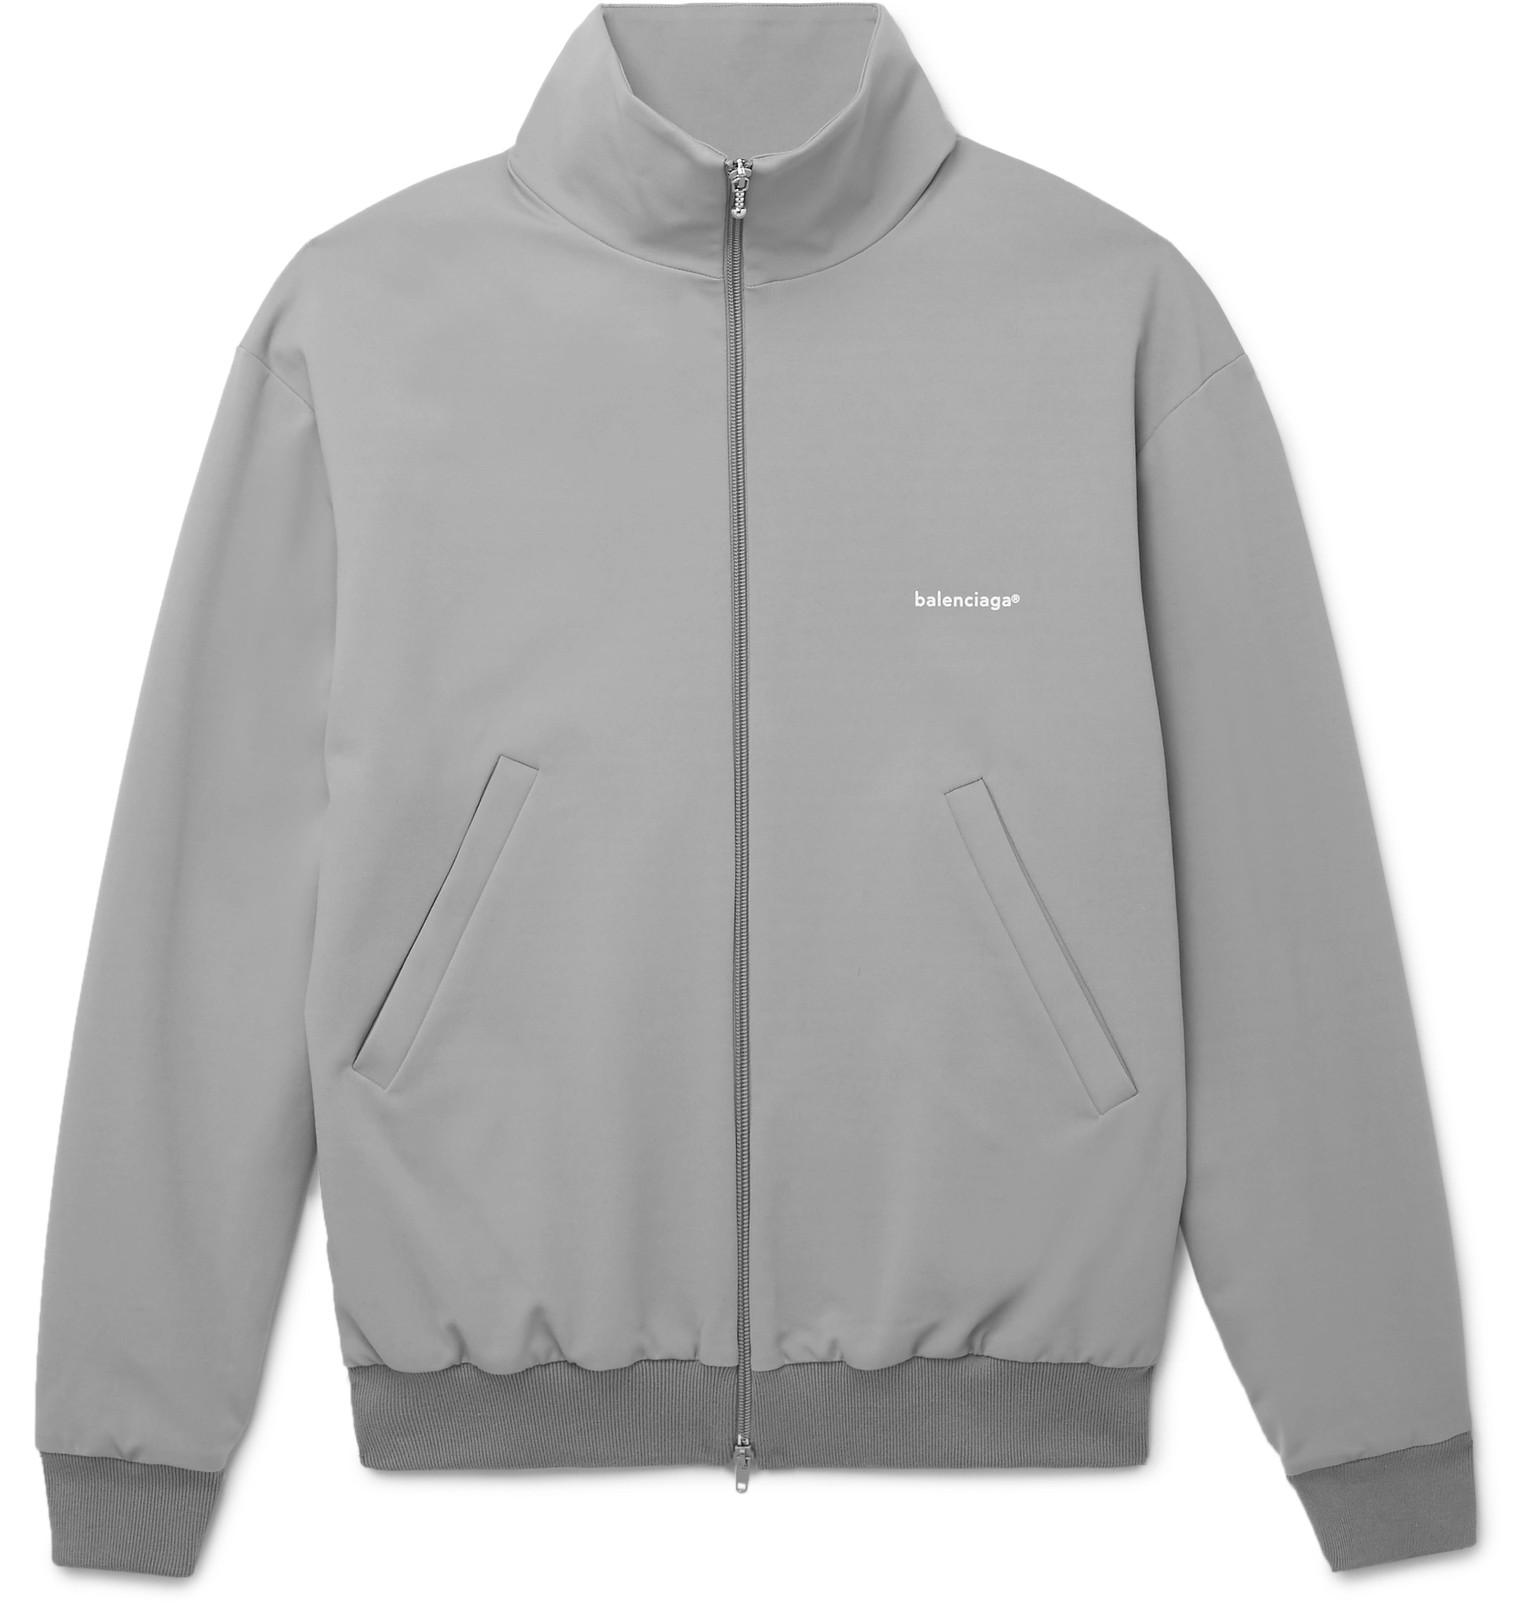 Jersey Track Jacket in Gray for Men - Lyst